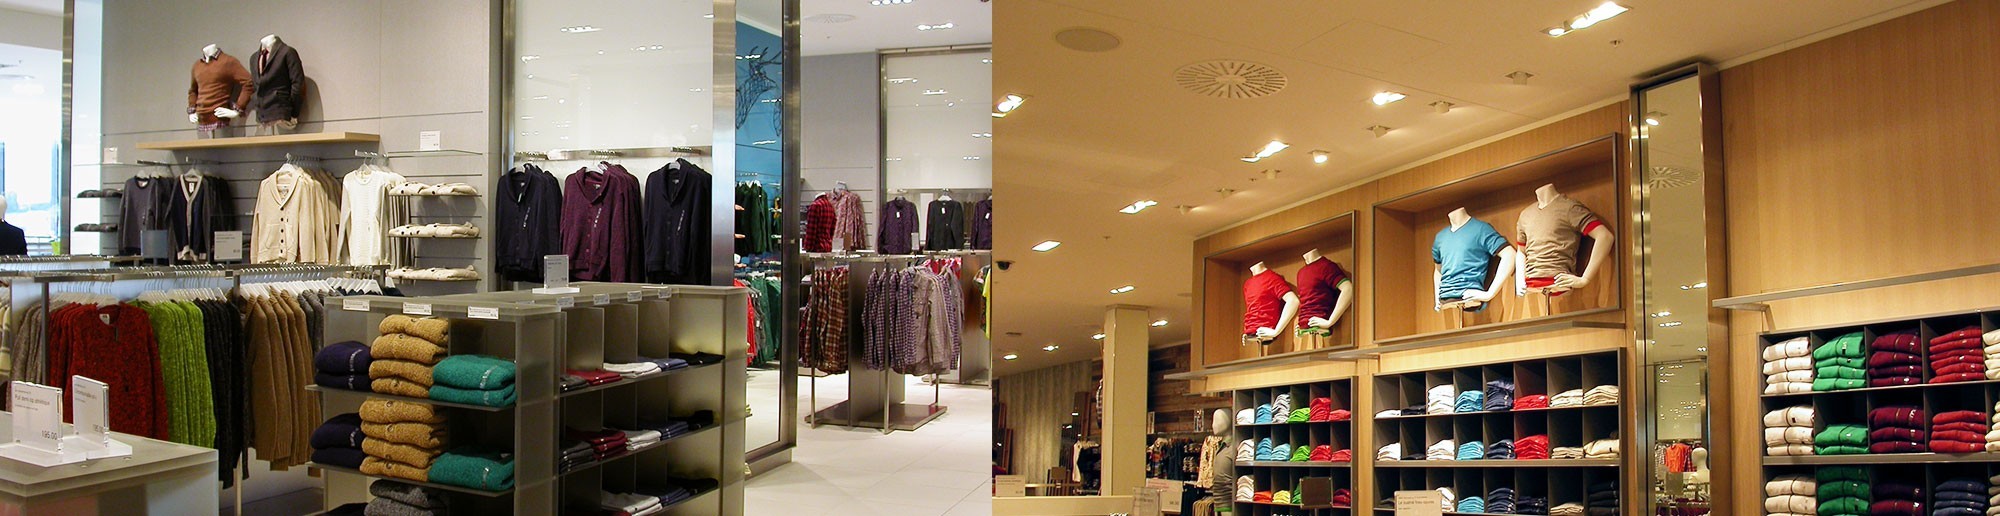 The Simons Stores